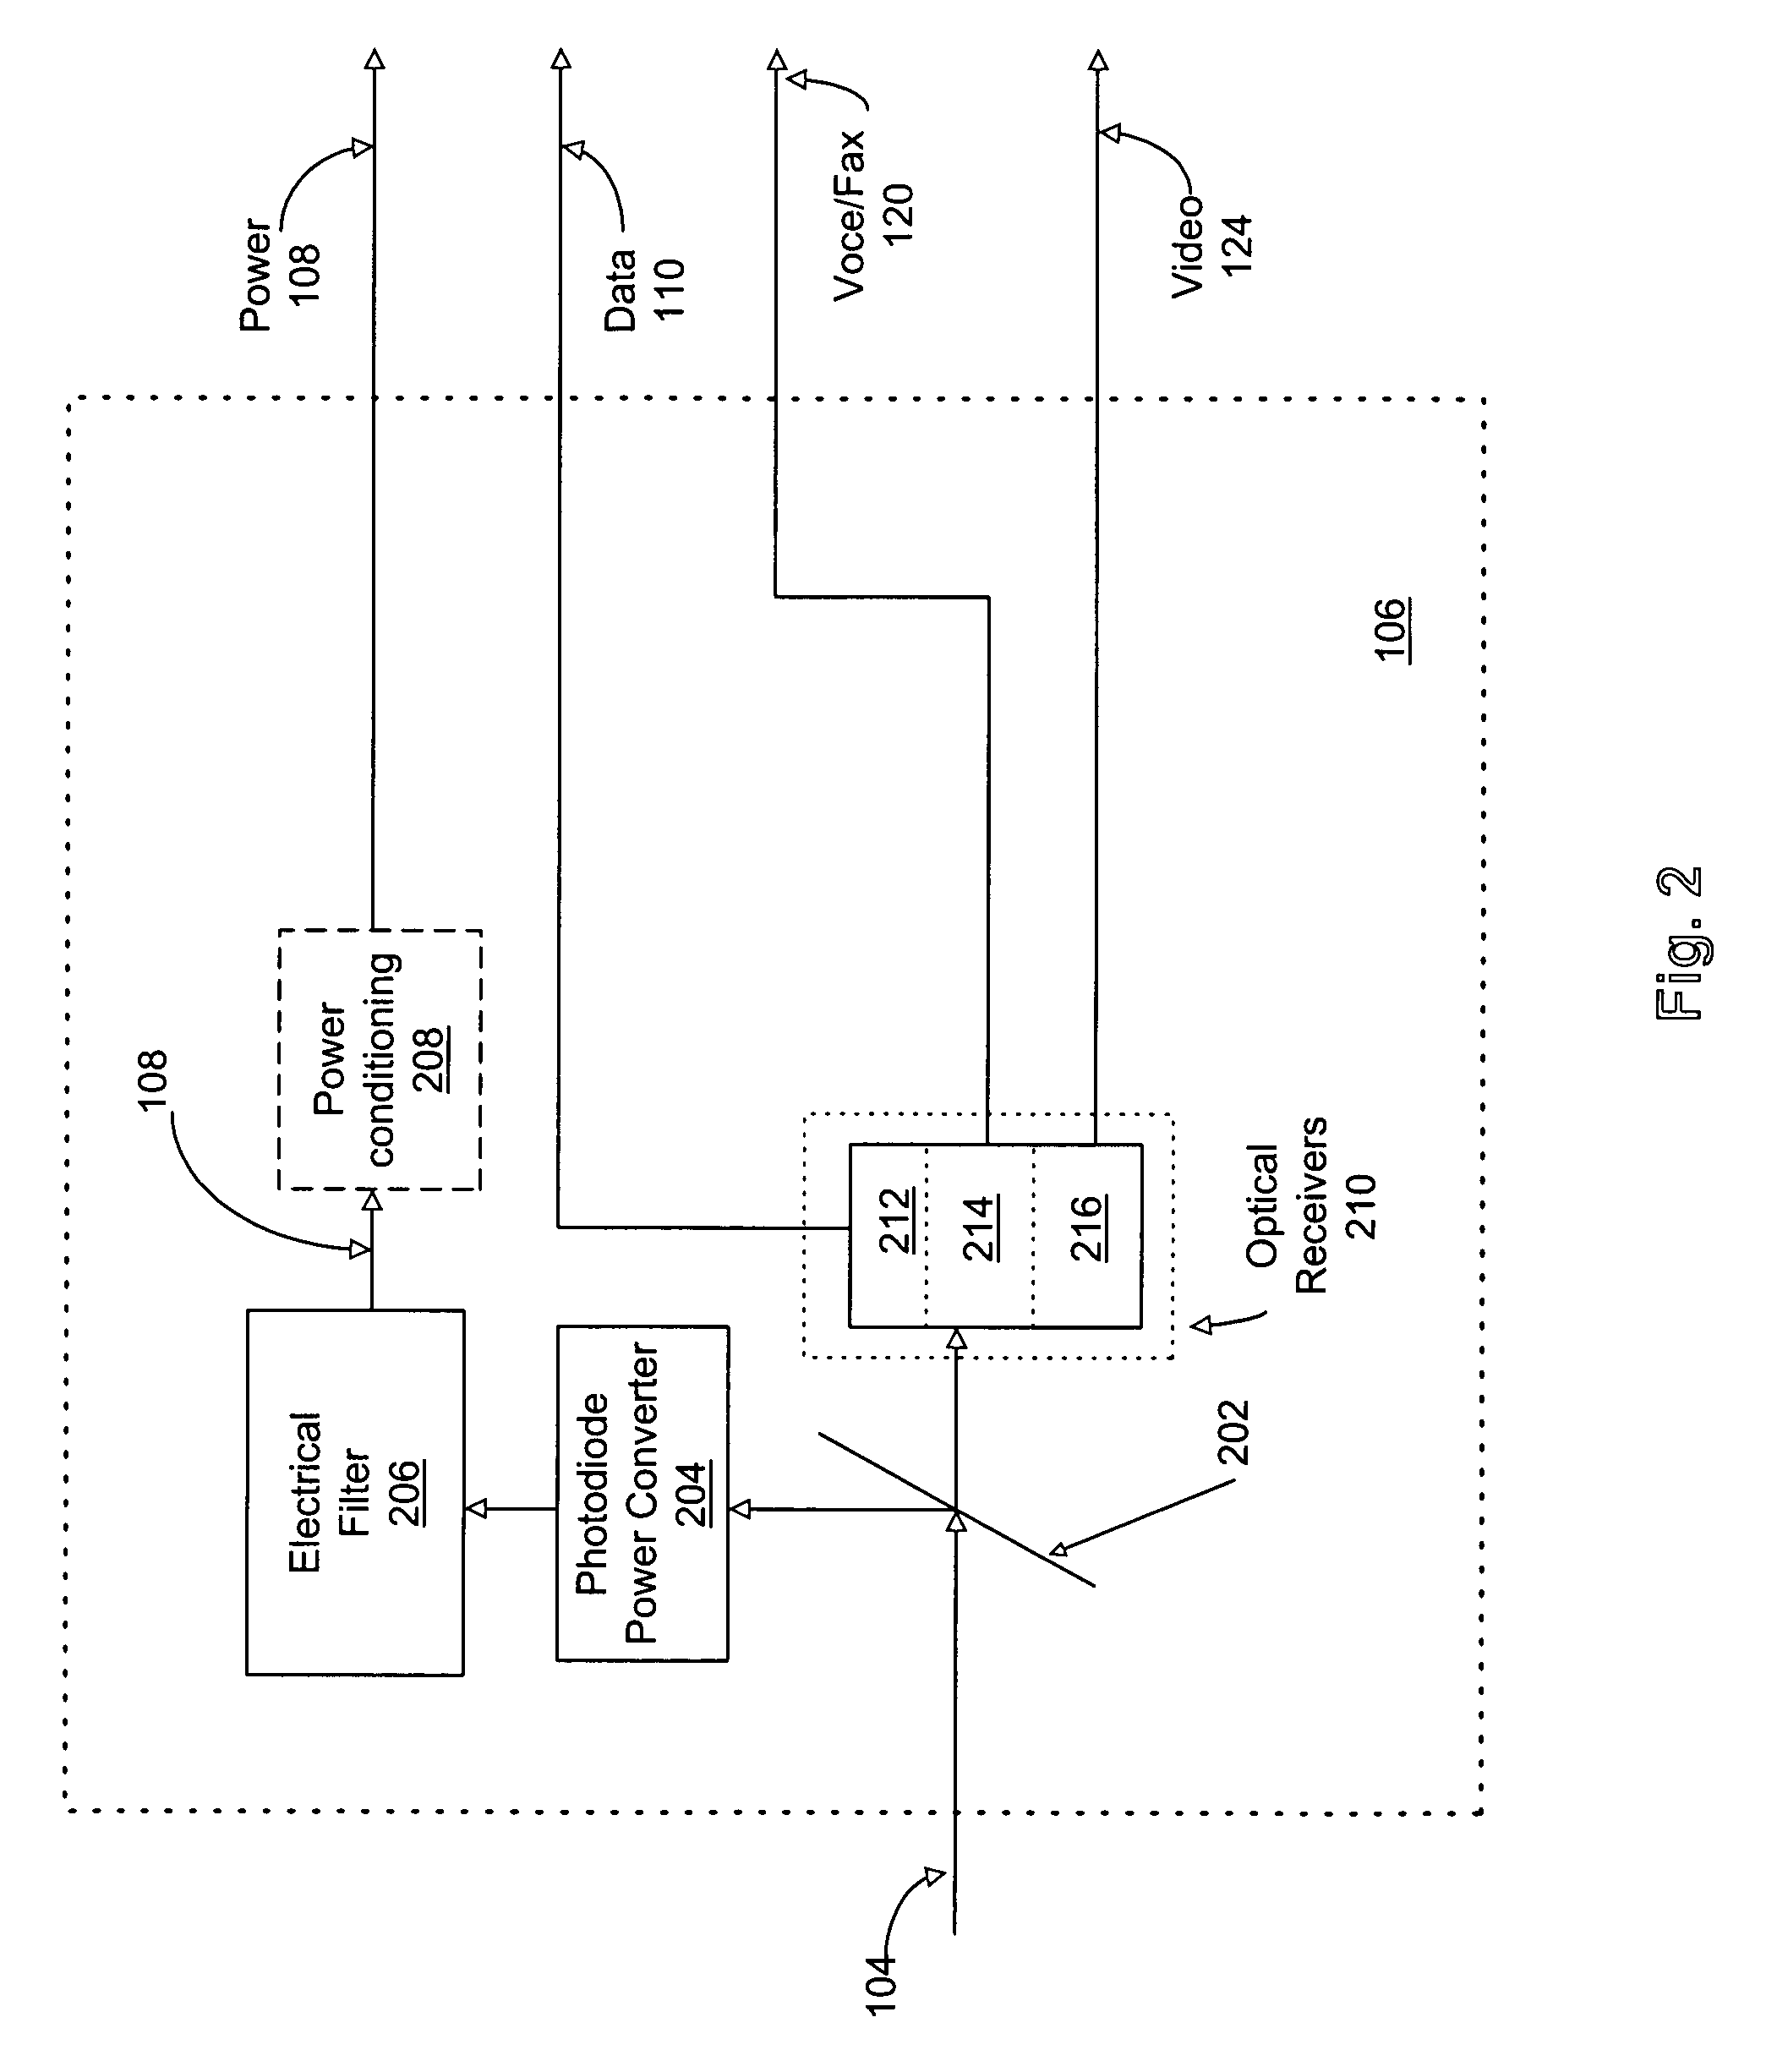 Method and apparatus for transmitting and receiving power over optical fiber